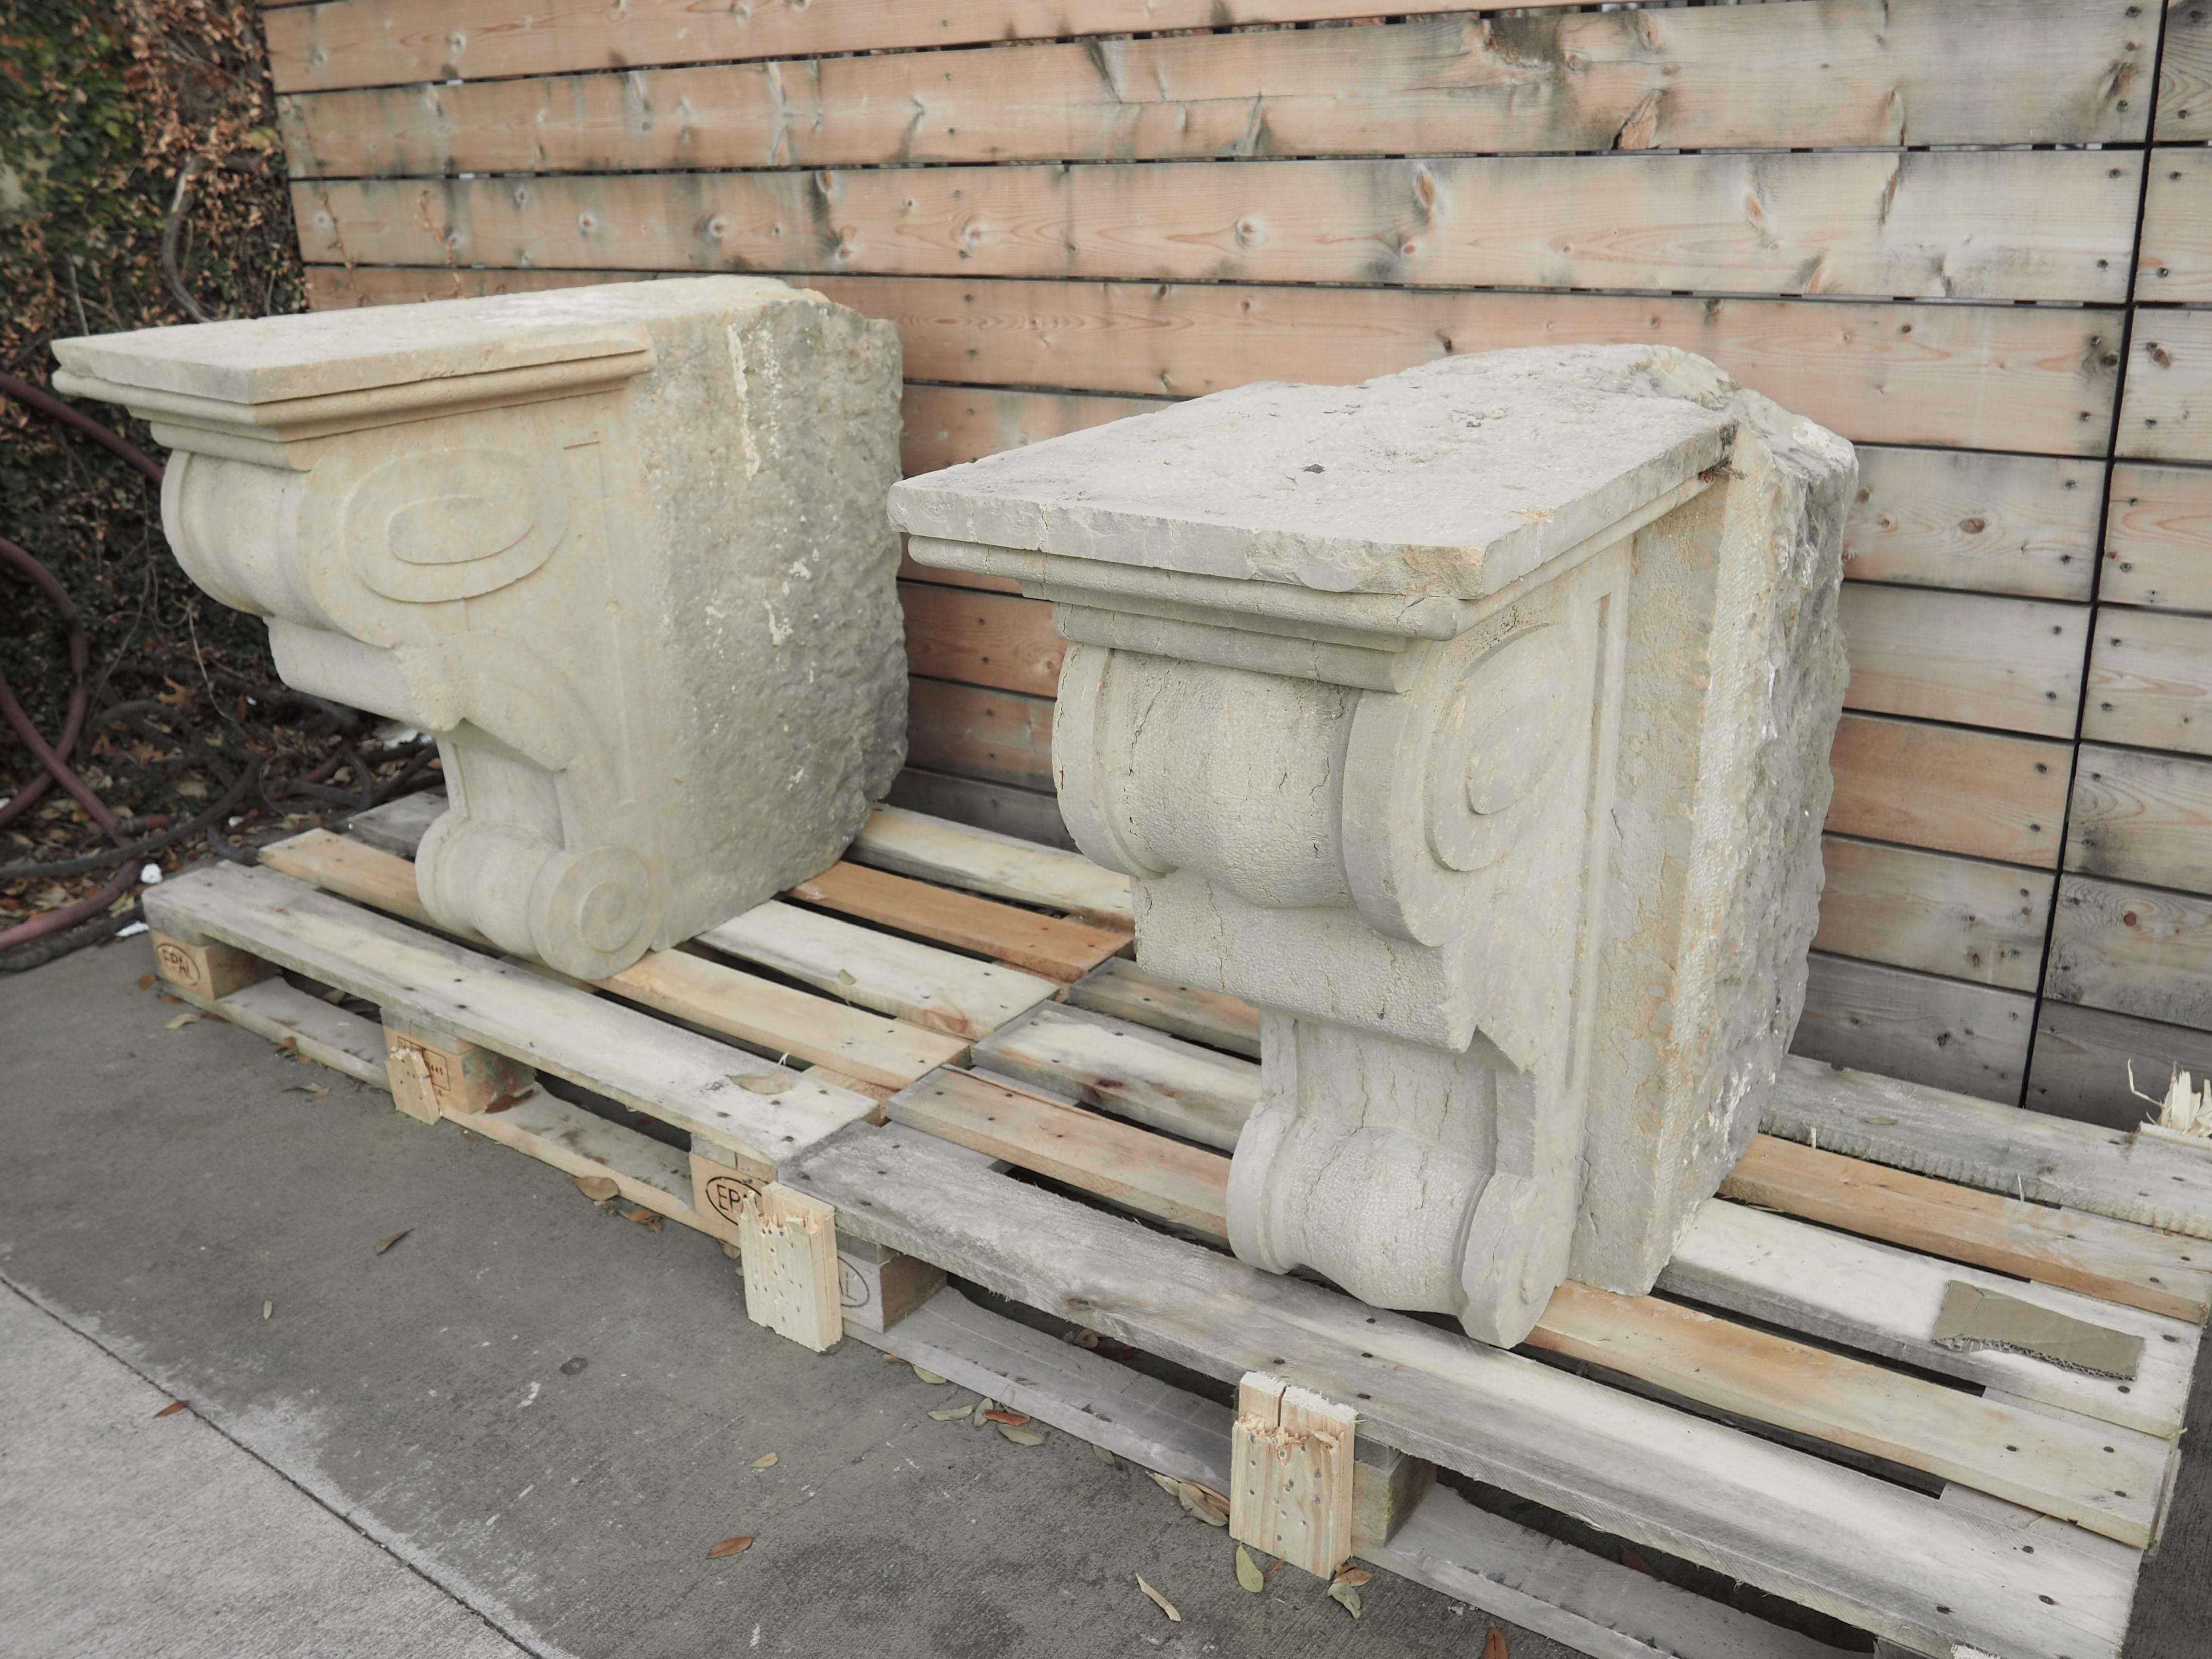 Recently salvaged from an important French building in the Lyon area, this pair of balcony corbels are from the Napoleon III period (sometimes called Second Empire style). Each corbel was hand-carved in pierre de villebois stone, which is a very